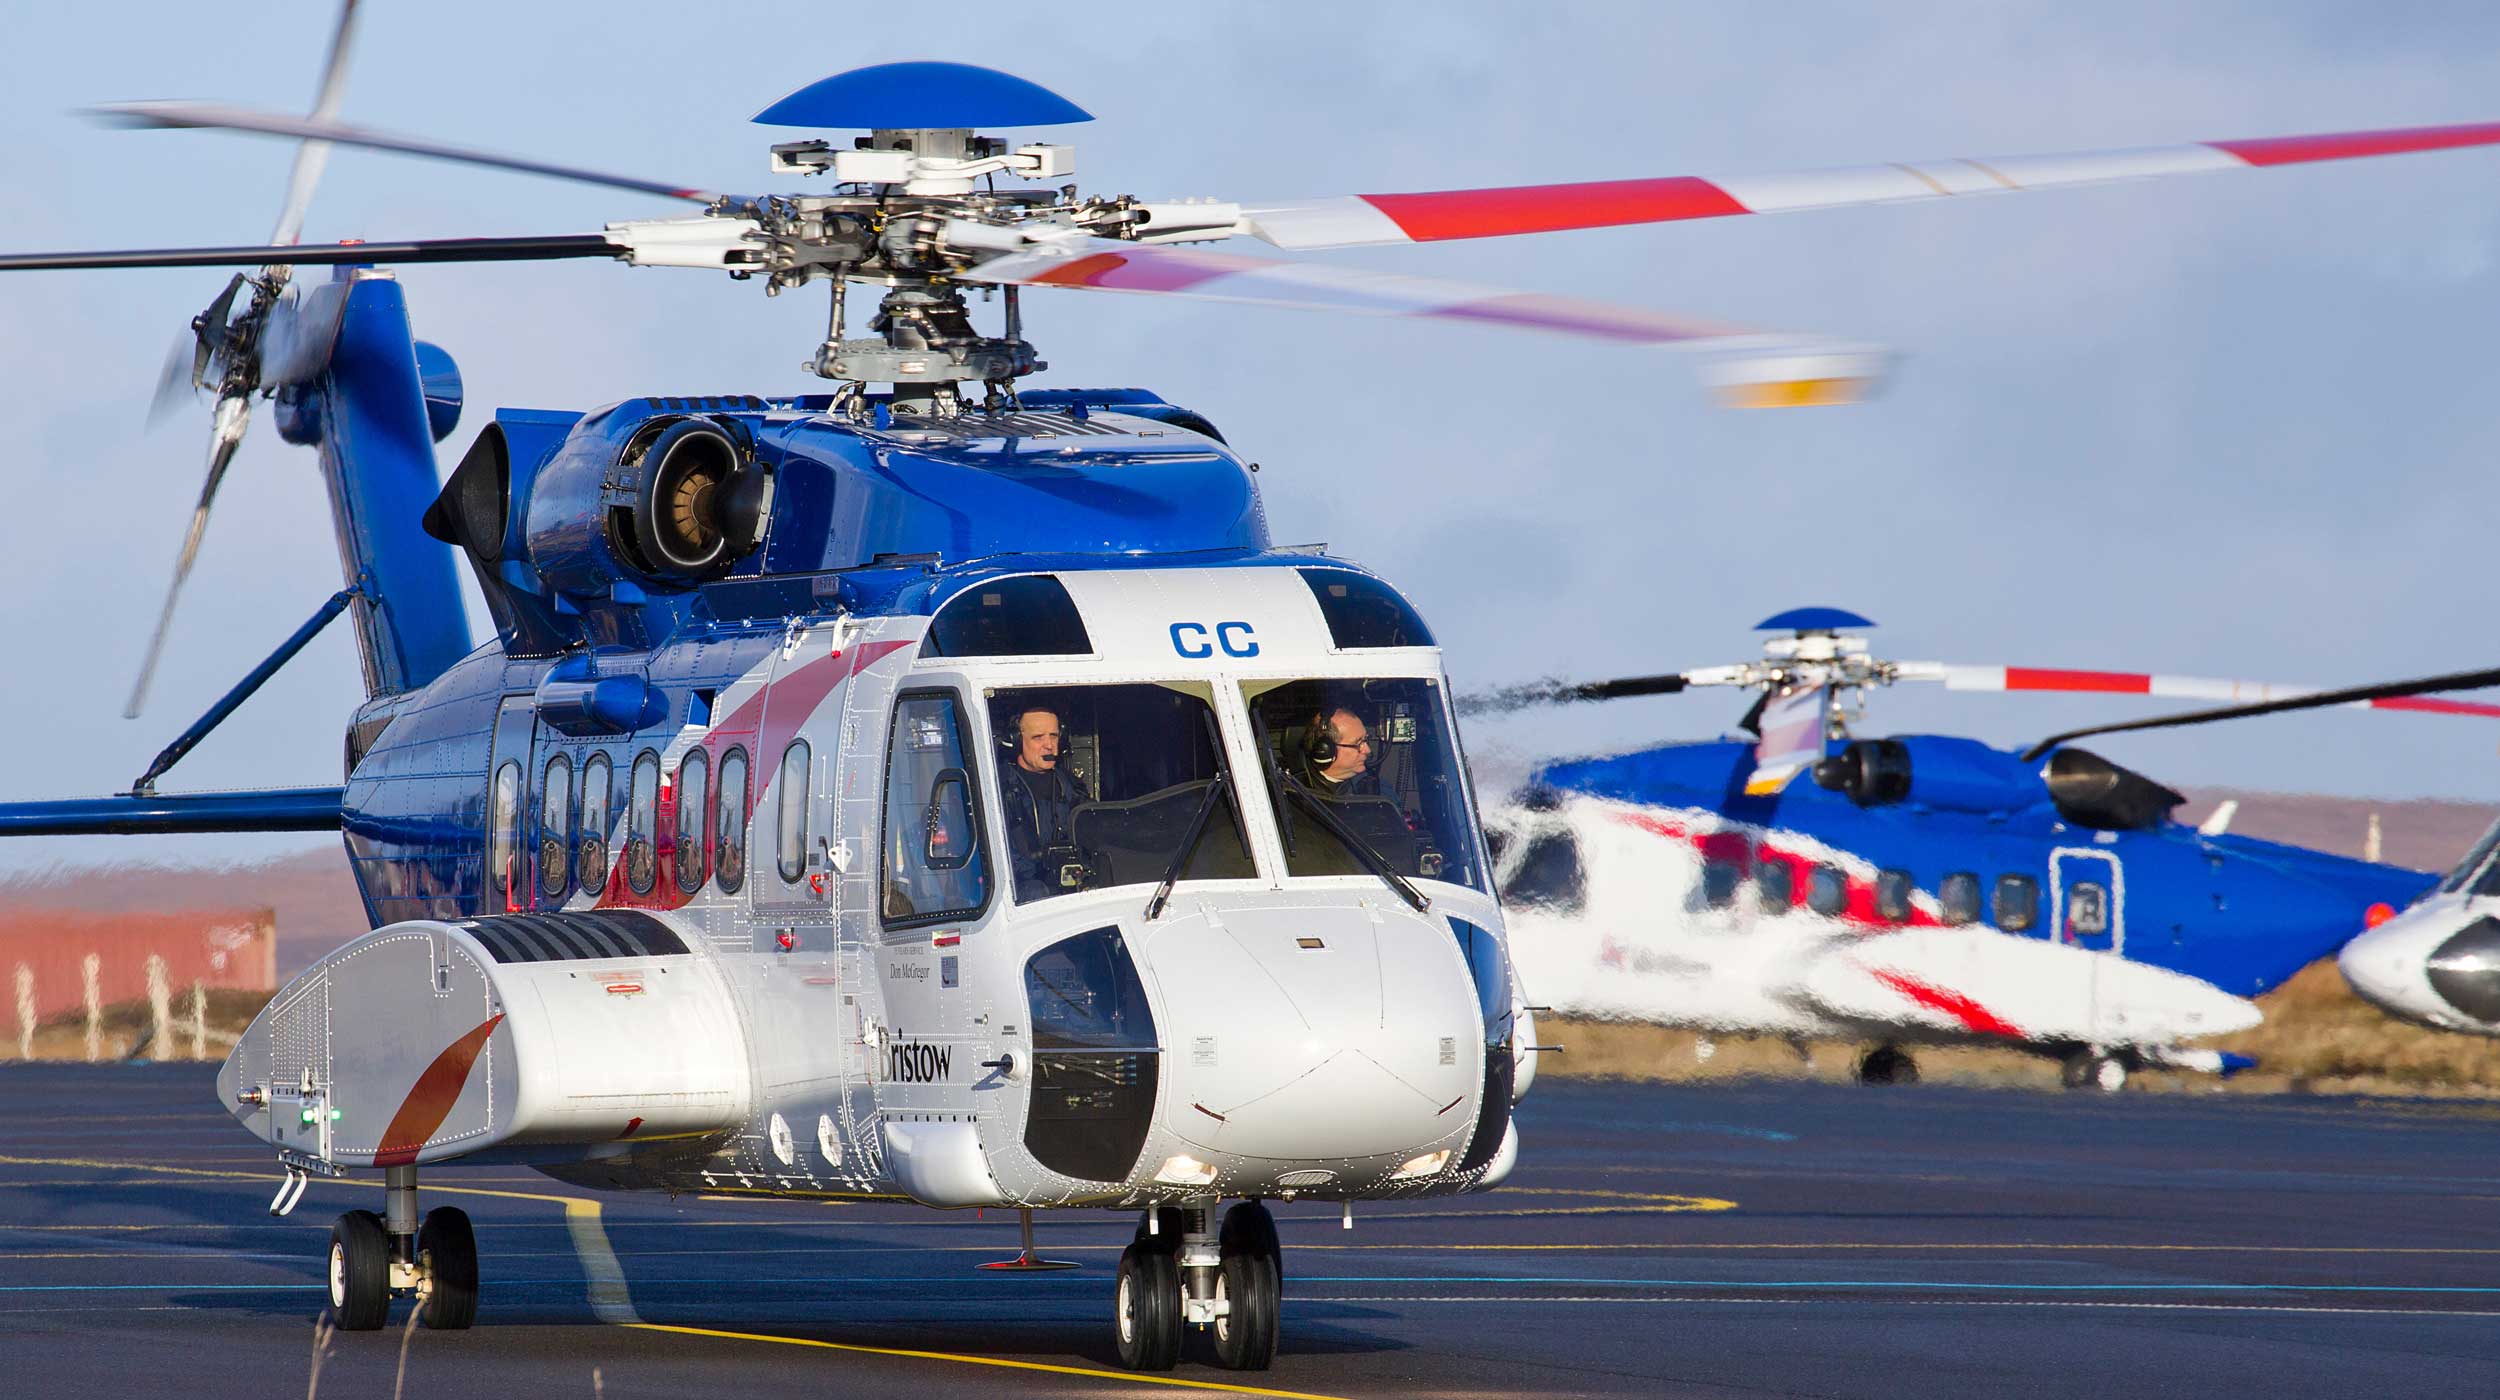 Bristow S92 helicopter